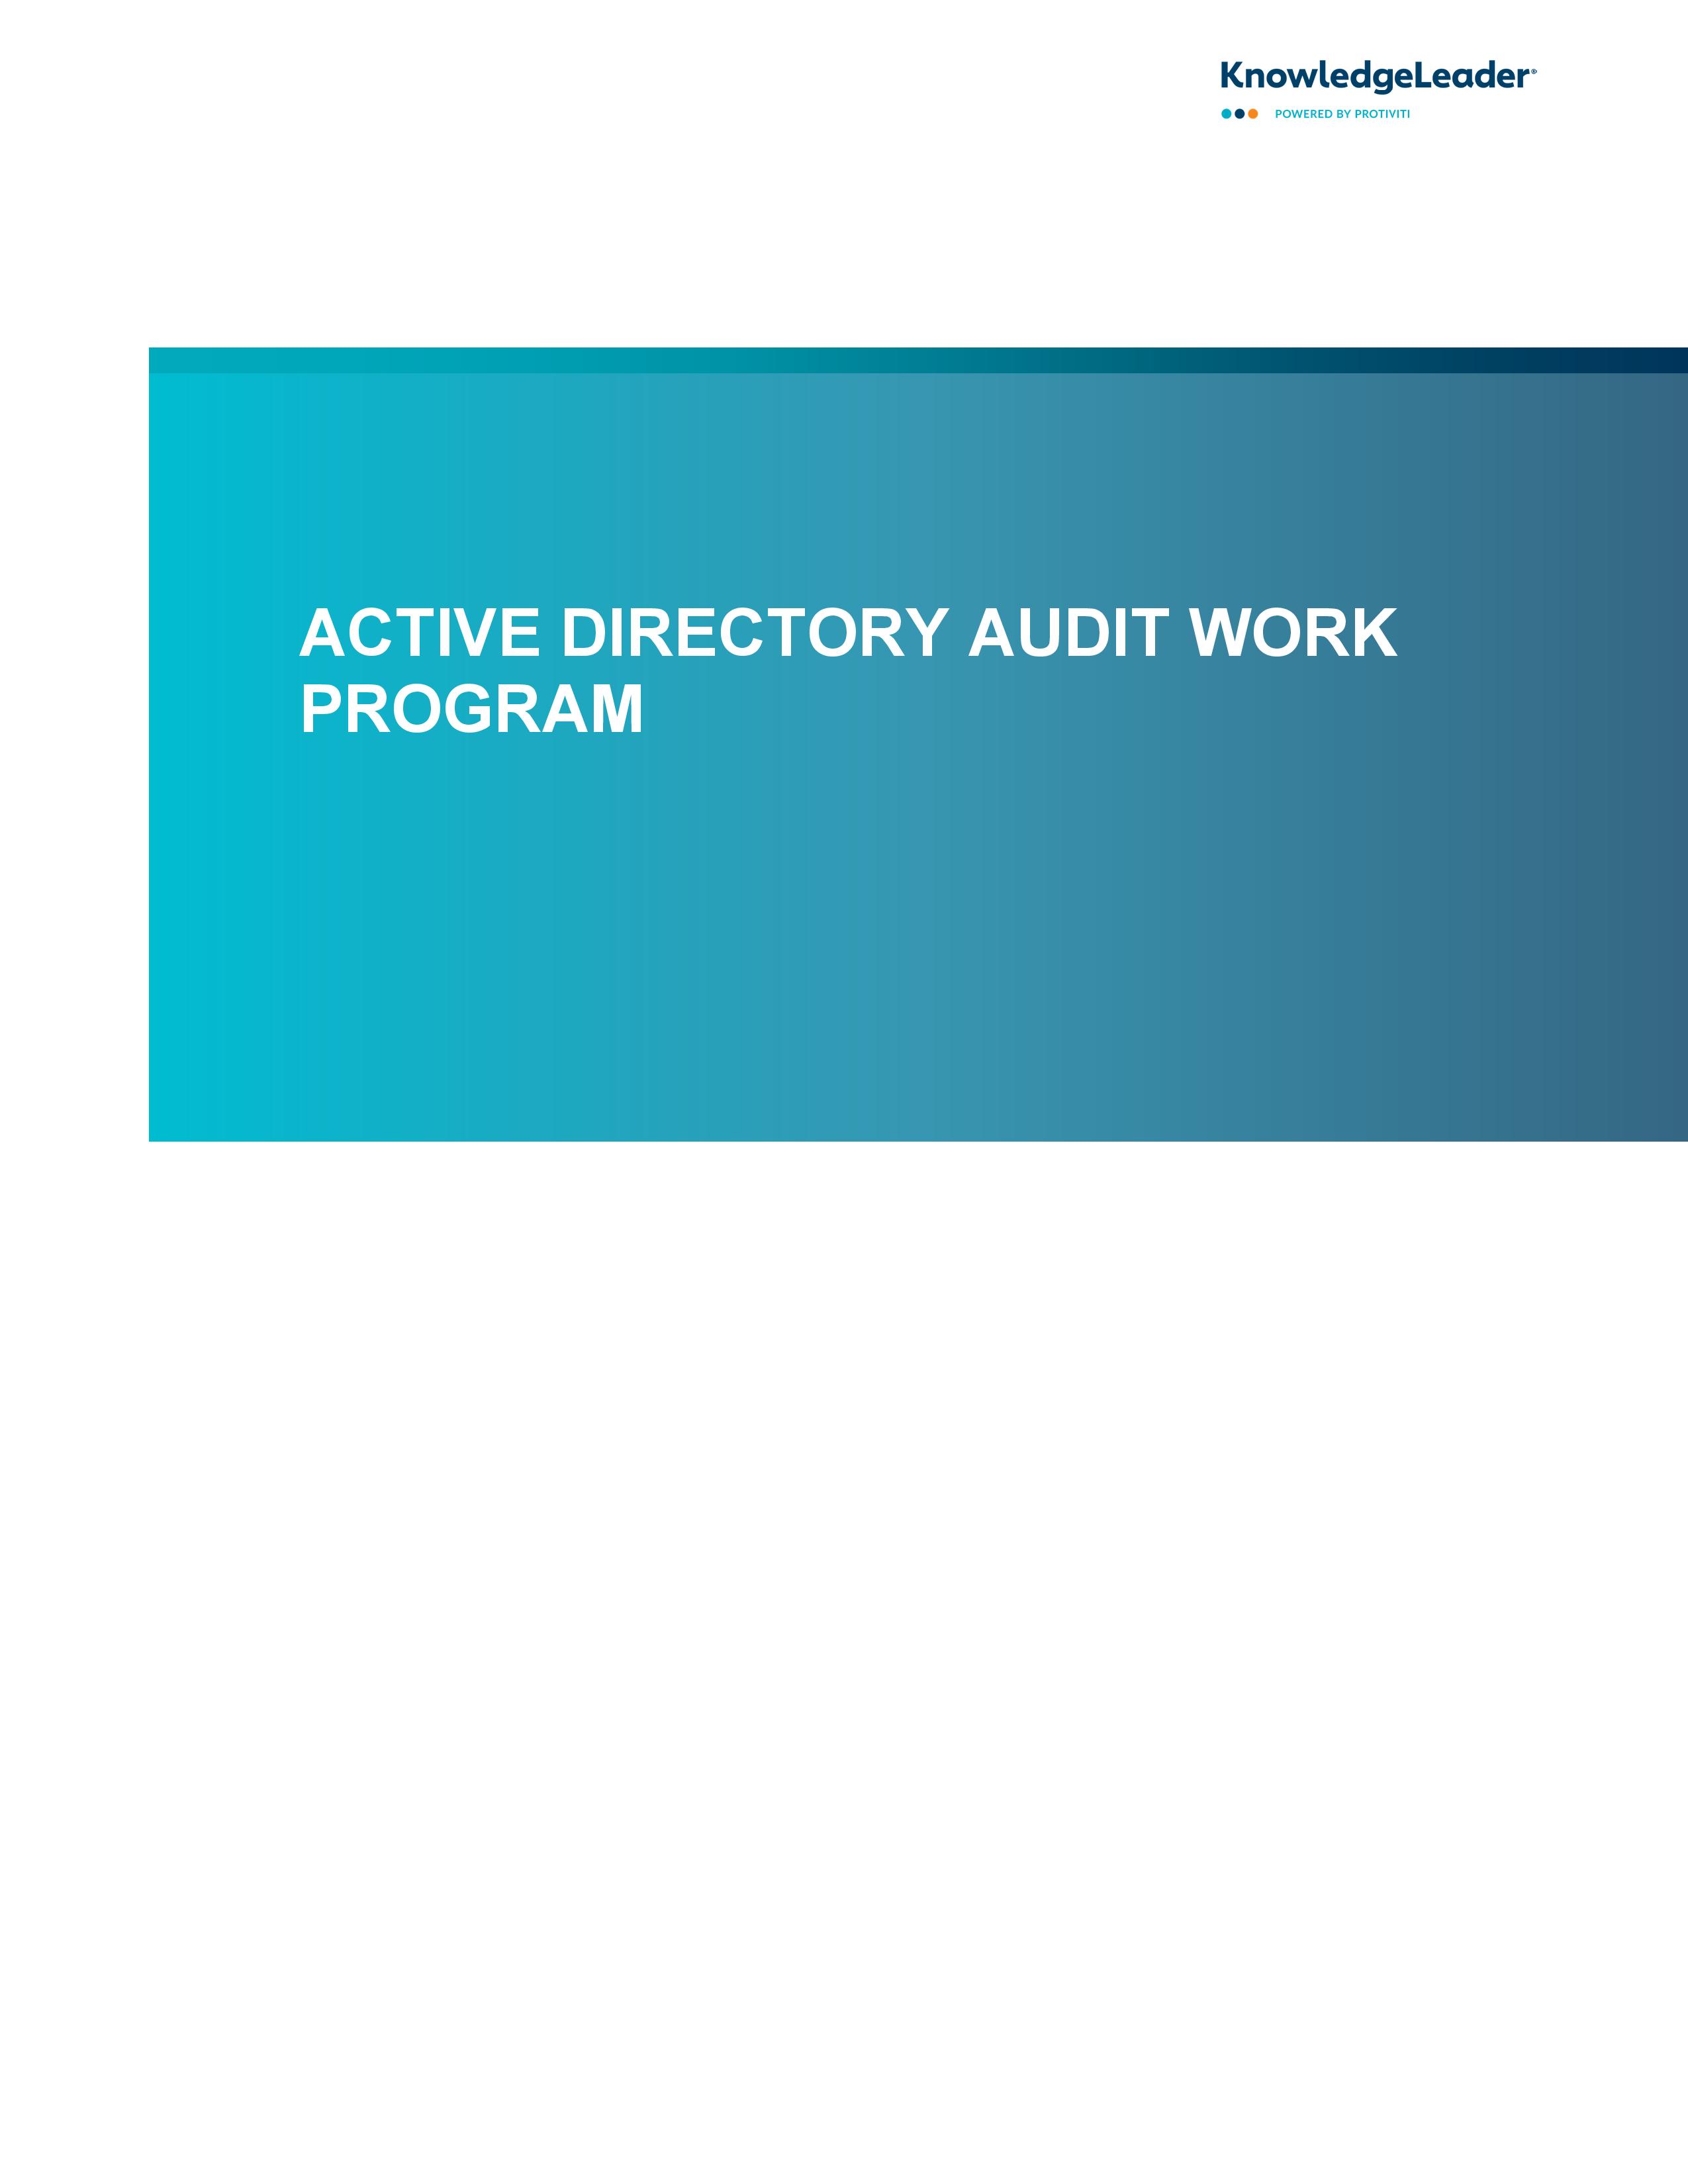 Screenshot of the first page of Active Directory Audit Work Program